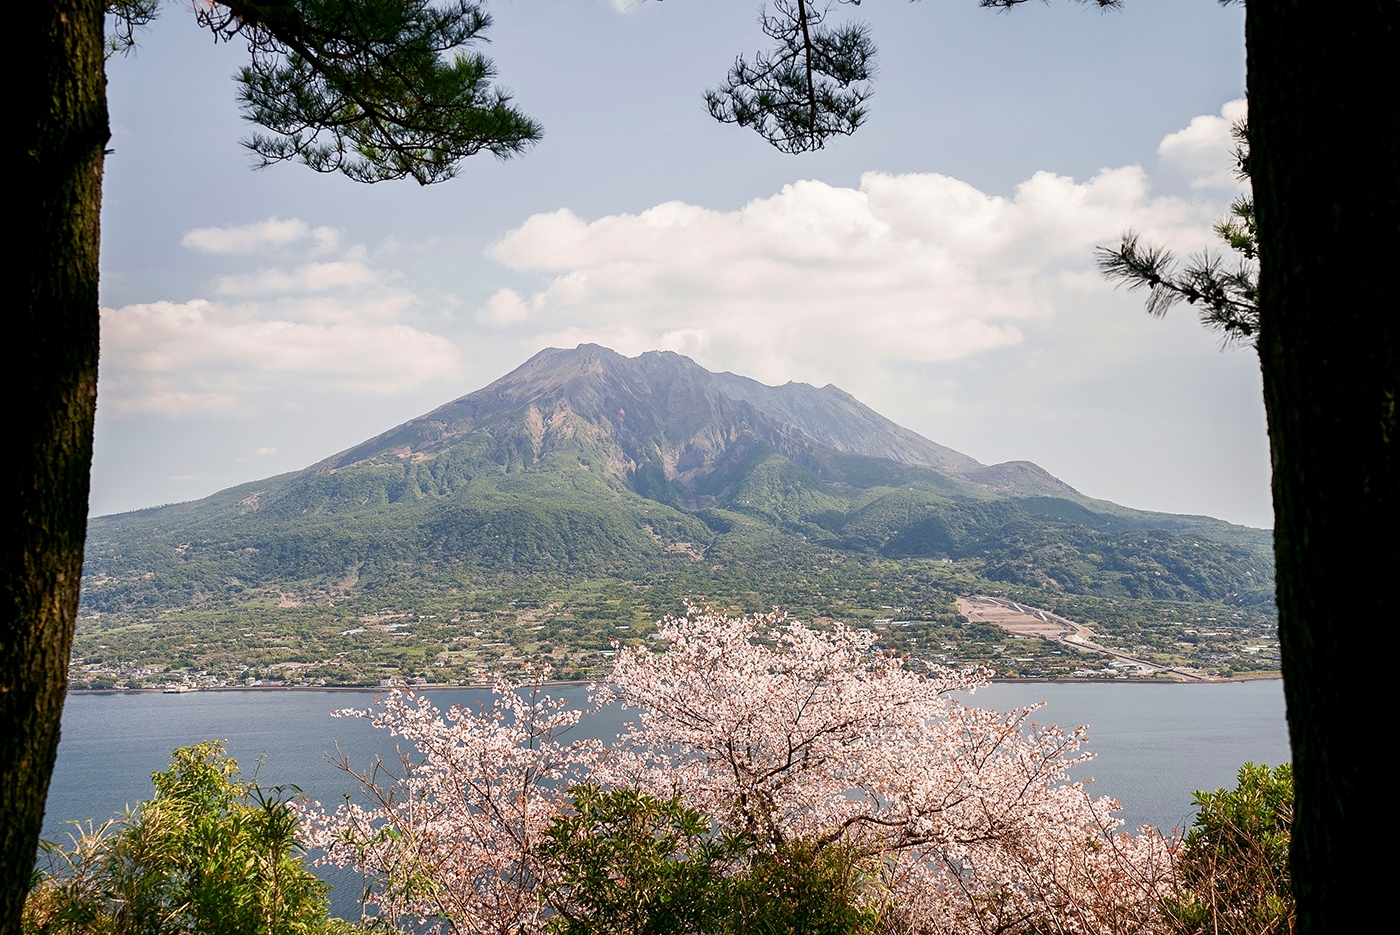 Mount Sakurajima in Kagoshima, is a stratovolcano known for its stunning beauty, particularly in spring